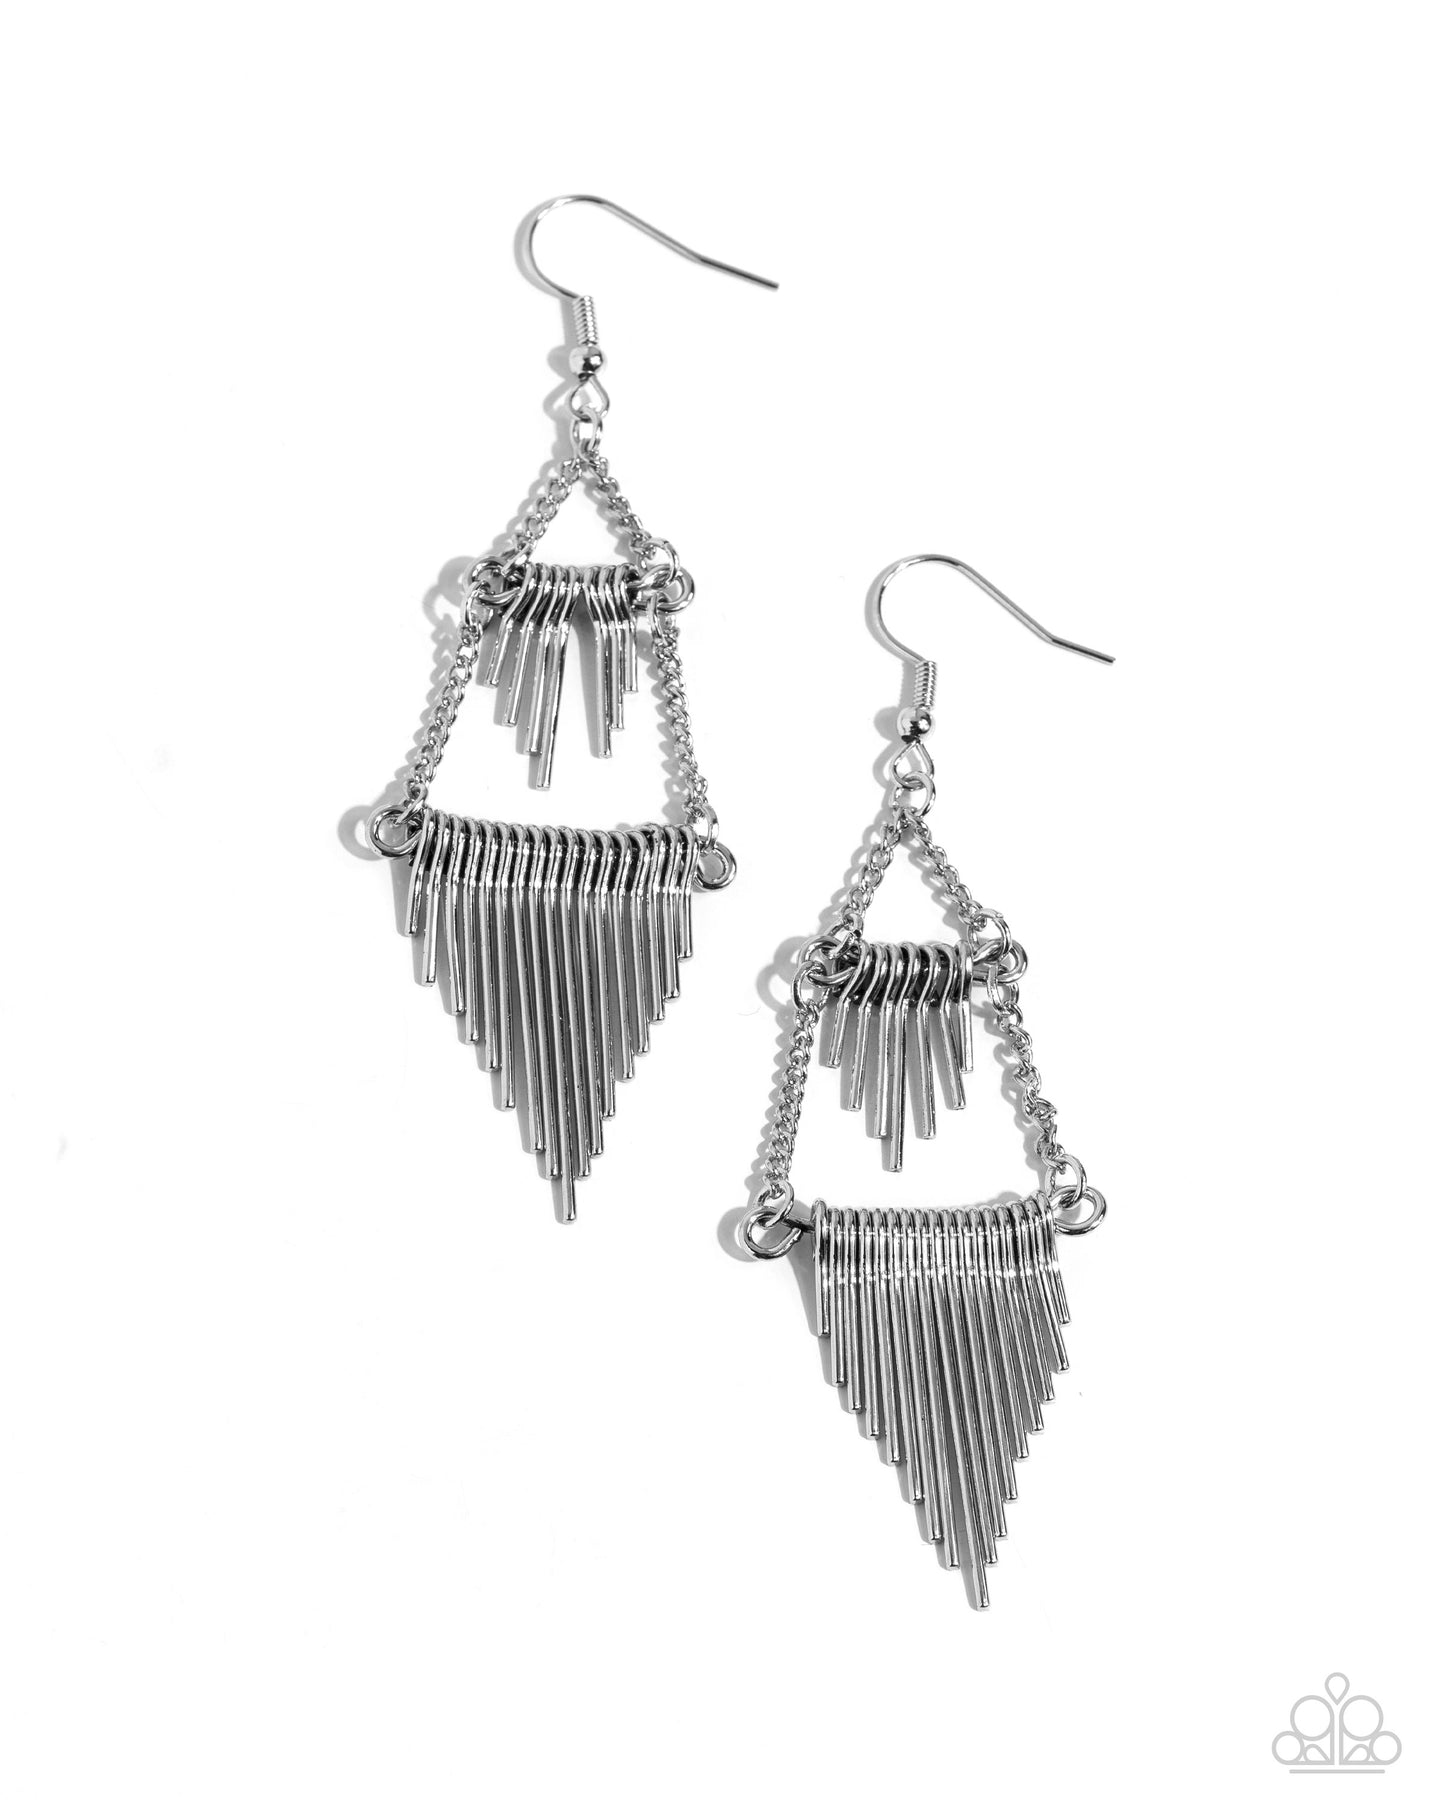 Greco Grotto - silver - Paparazzi earrings